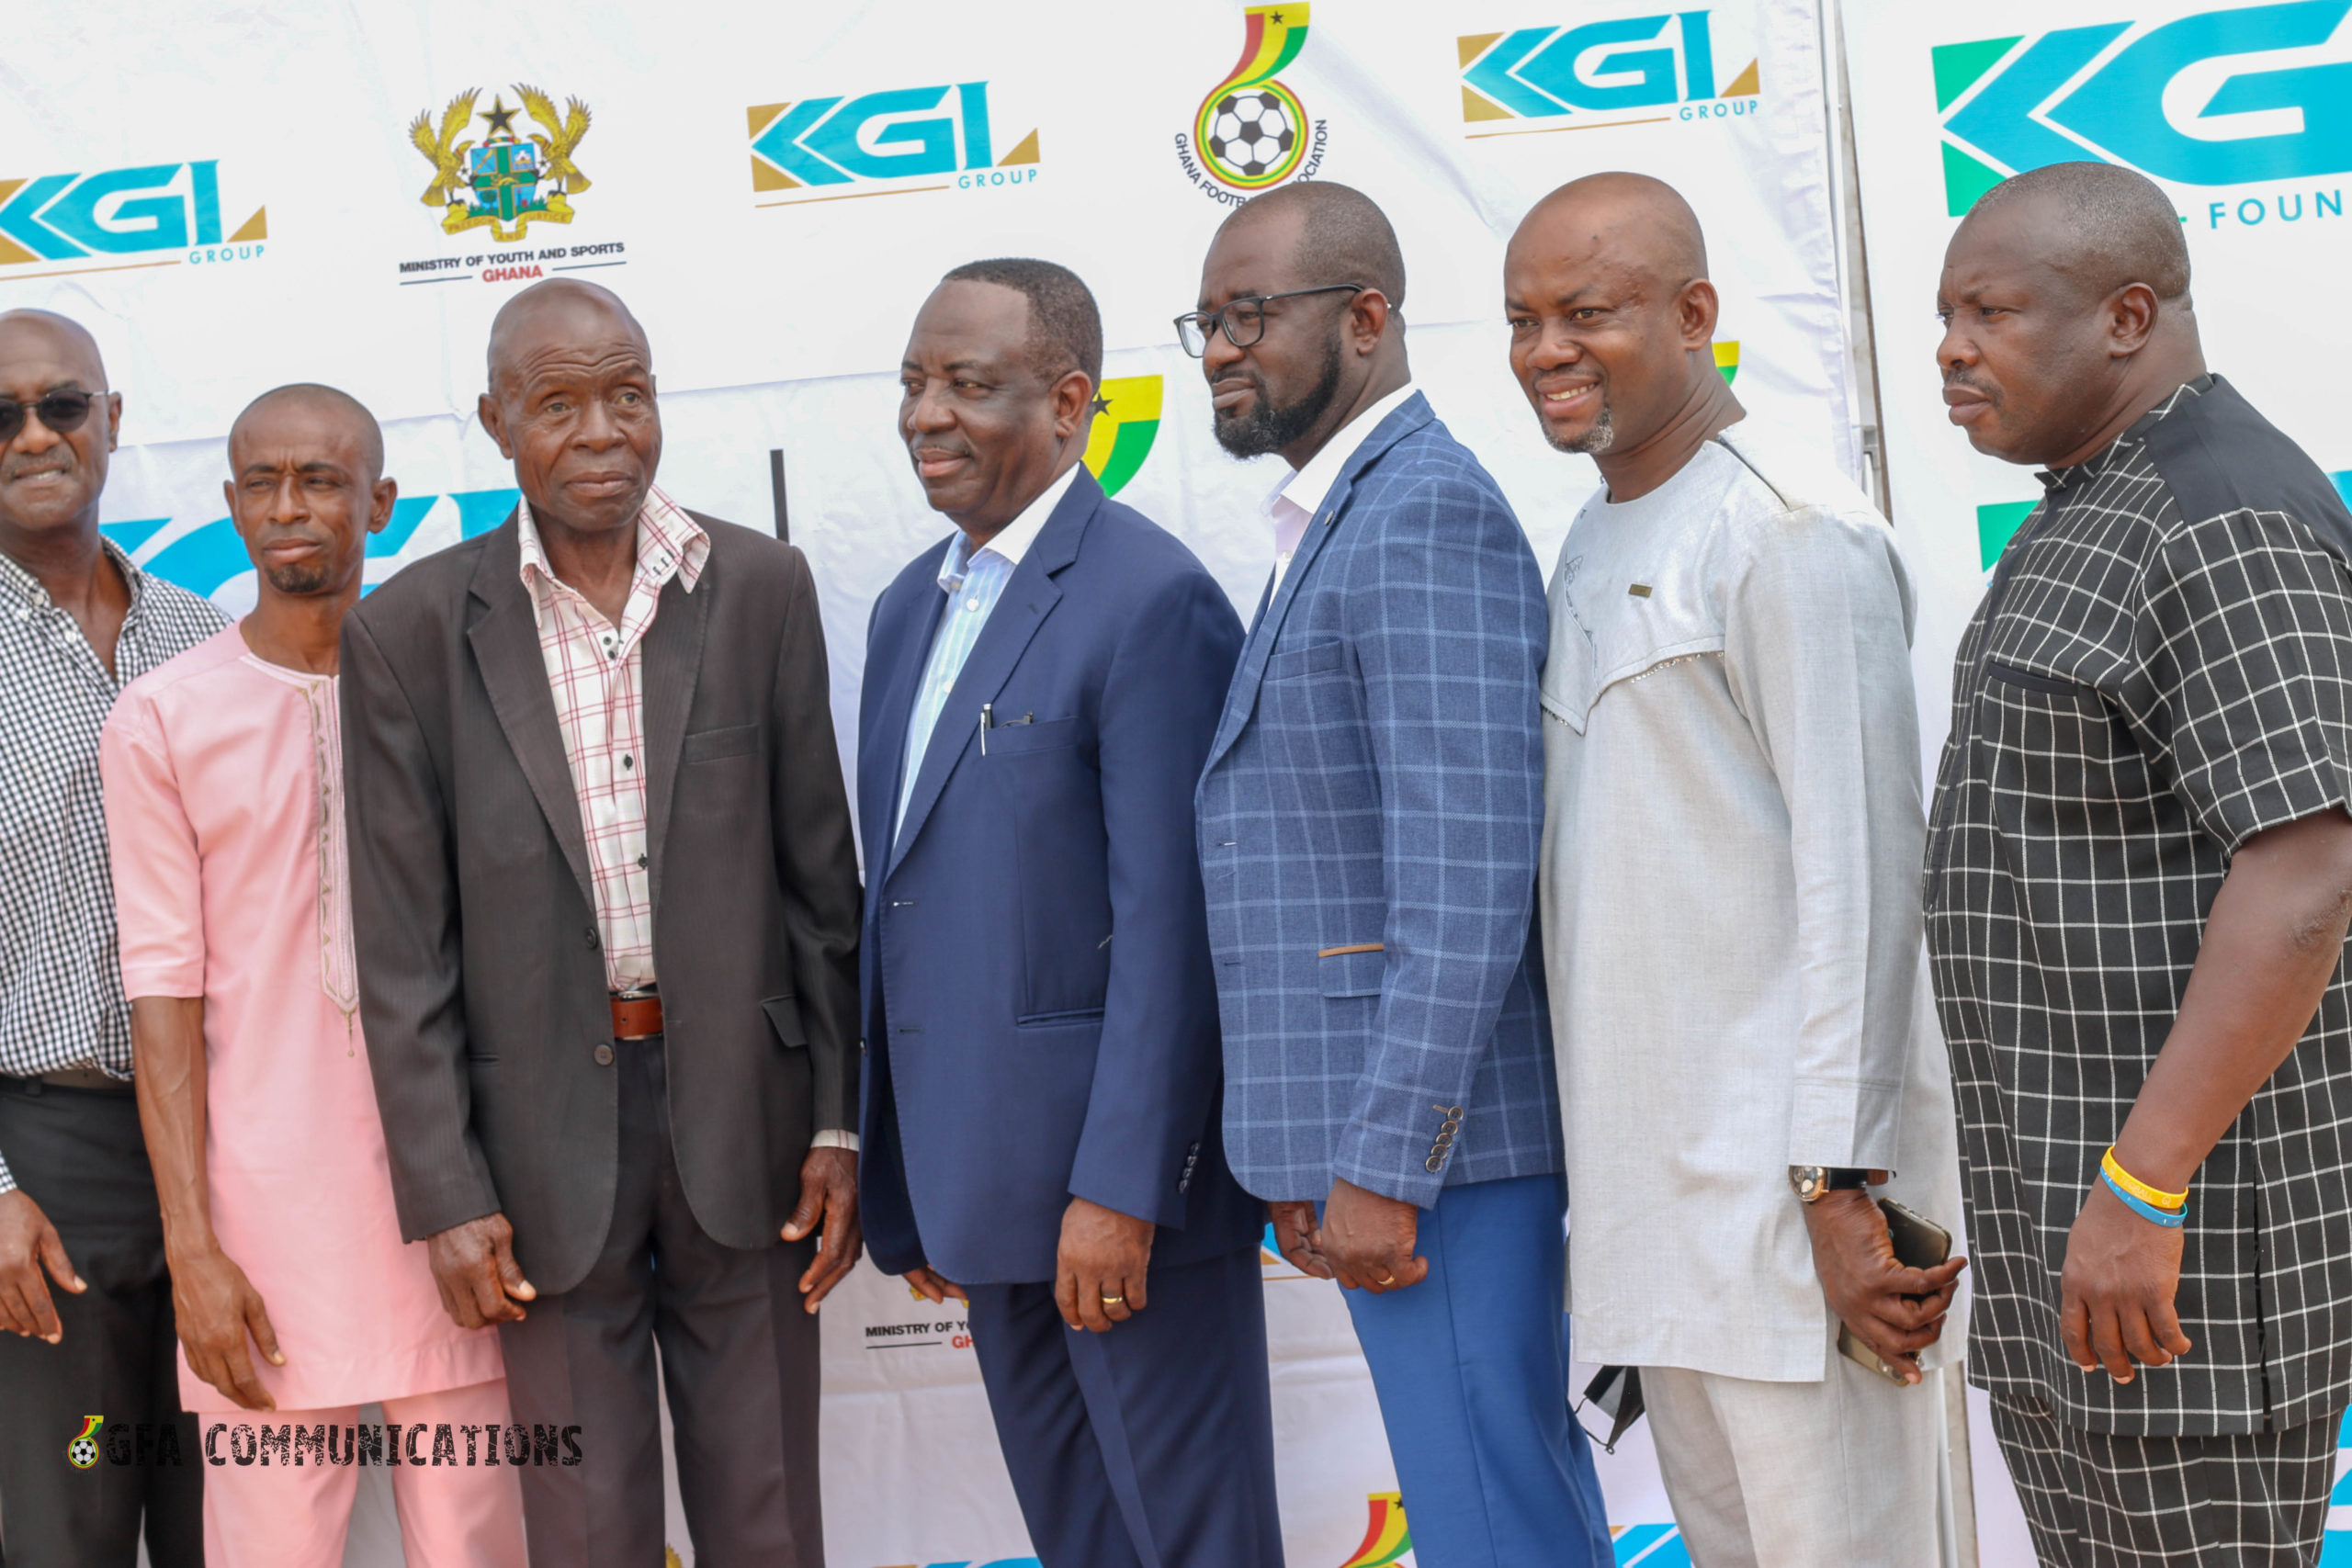 KGL Foundation agree to sponsor juvenile football in Ghana with $1 million for 5 years